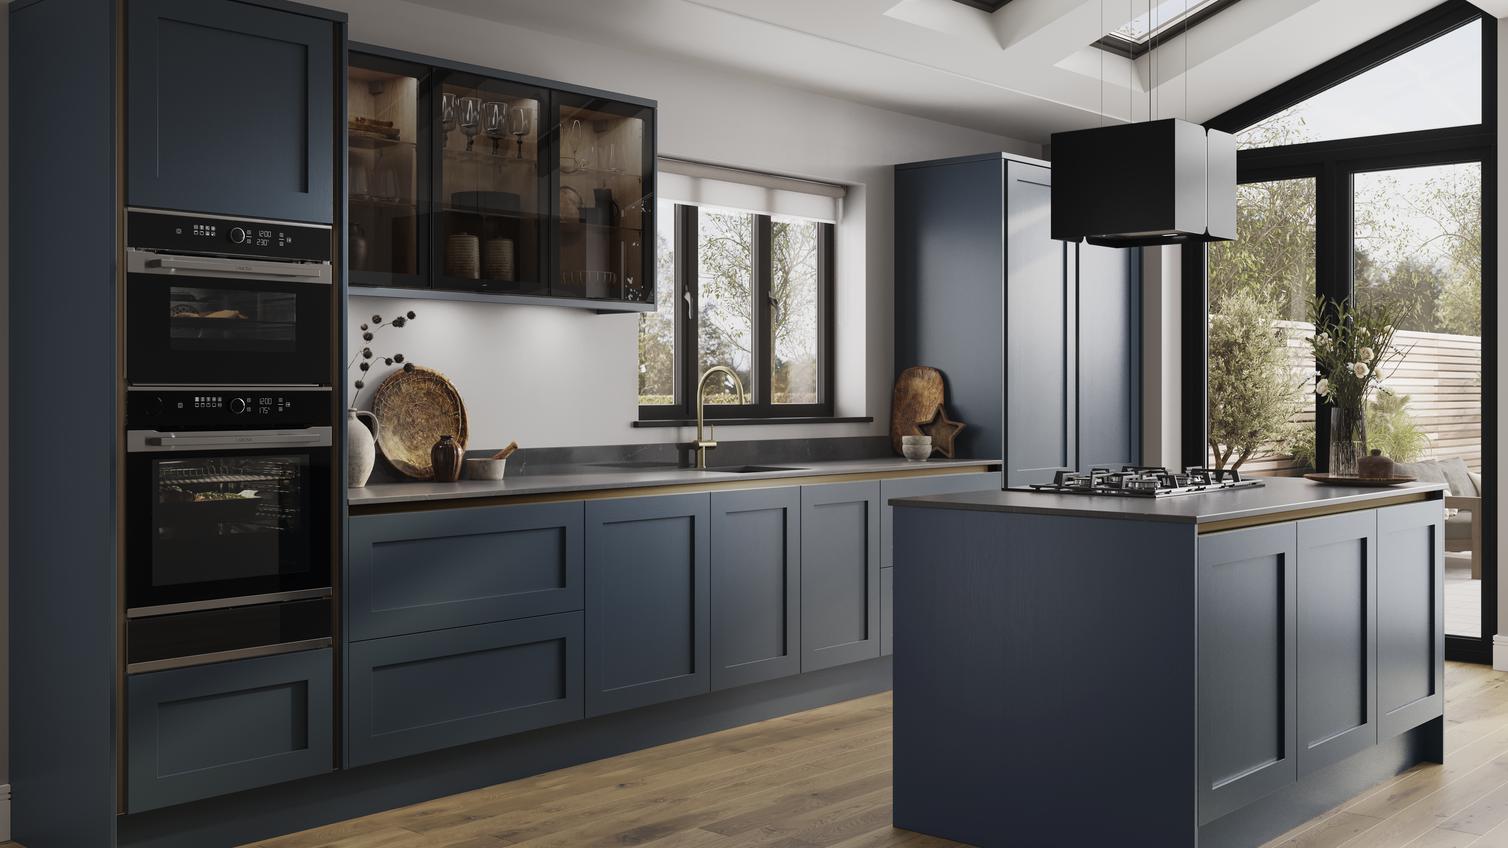 An island kitchen layout with blue shaker doors, black worktops, wood floors, and bronze profiles for a handleless look. 